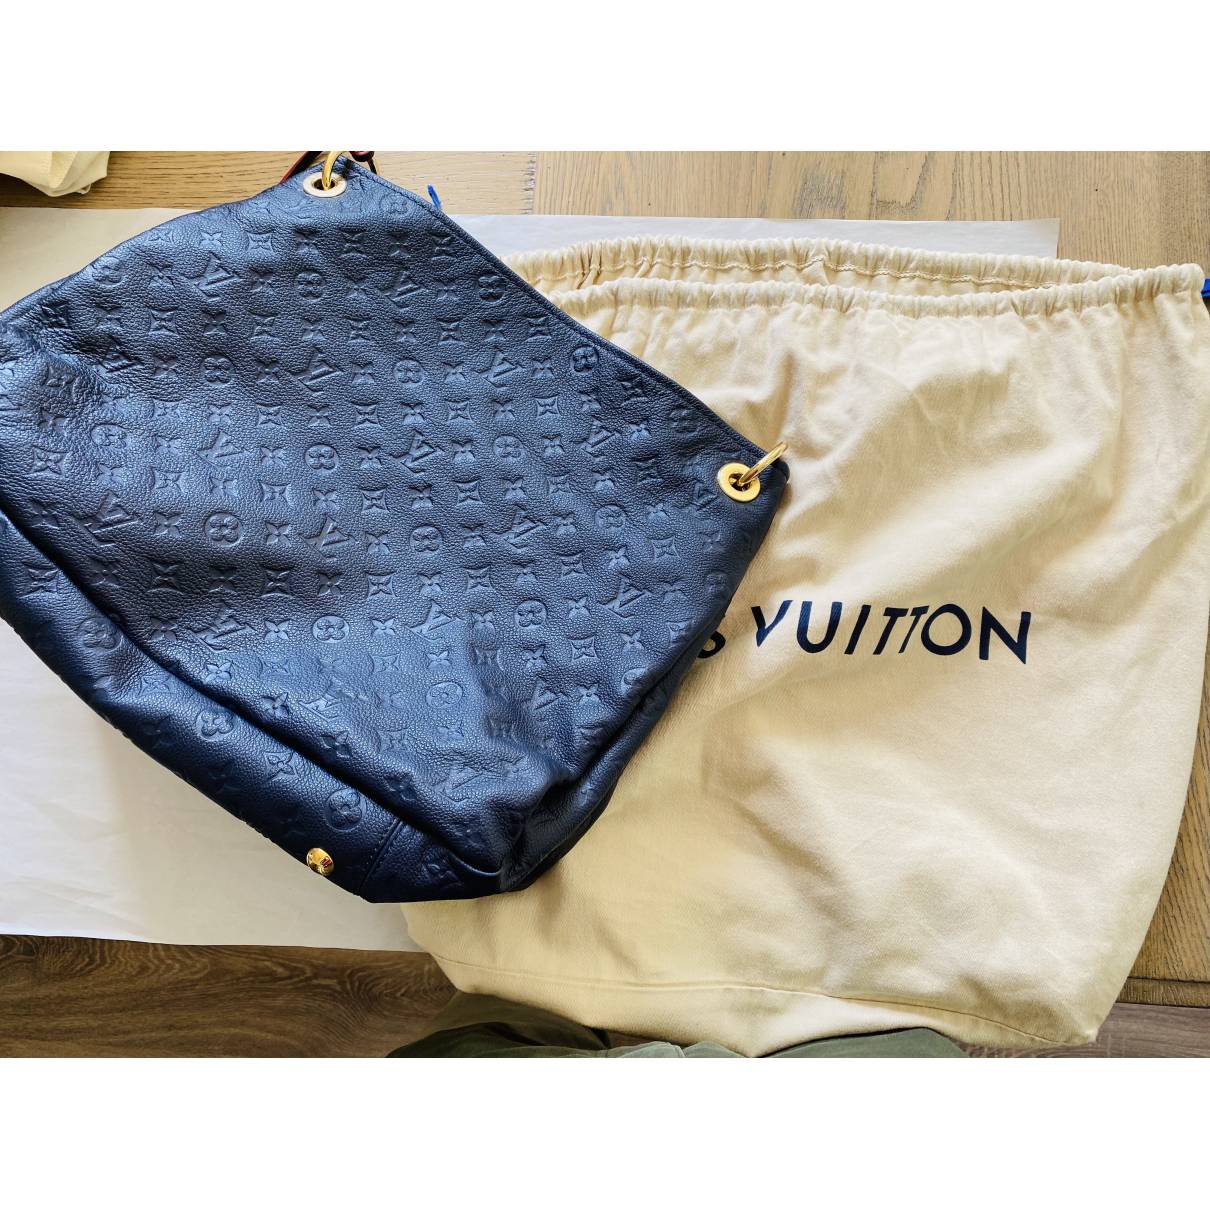 Artsy leather handbag Louis Vuitton Navy in Leather - 23579364